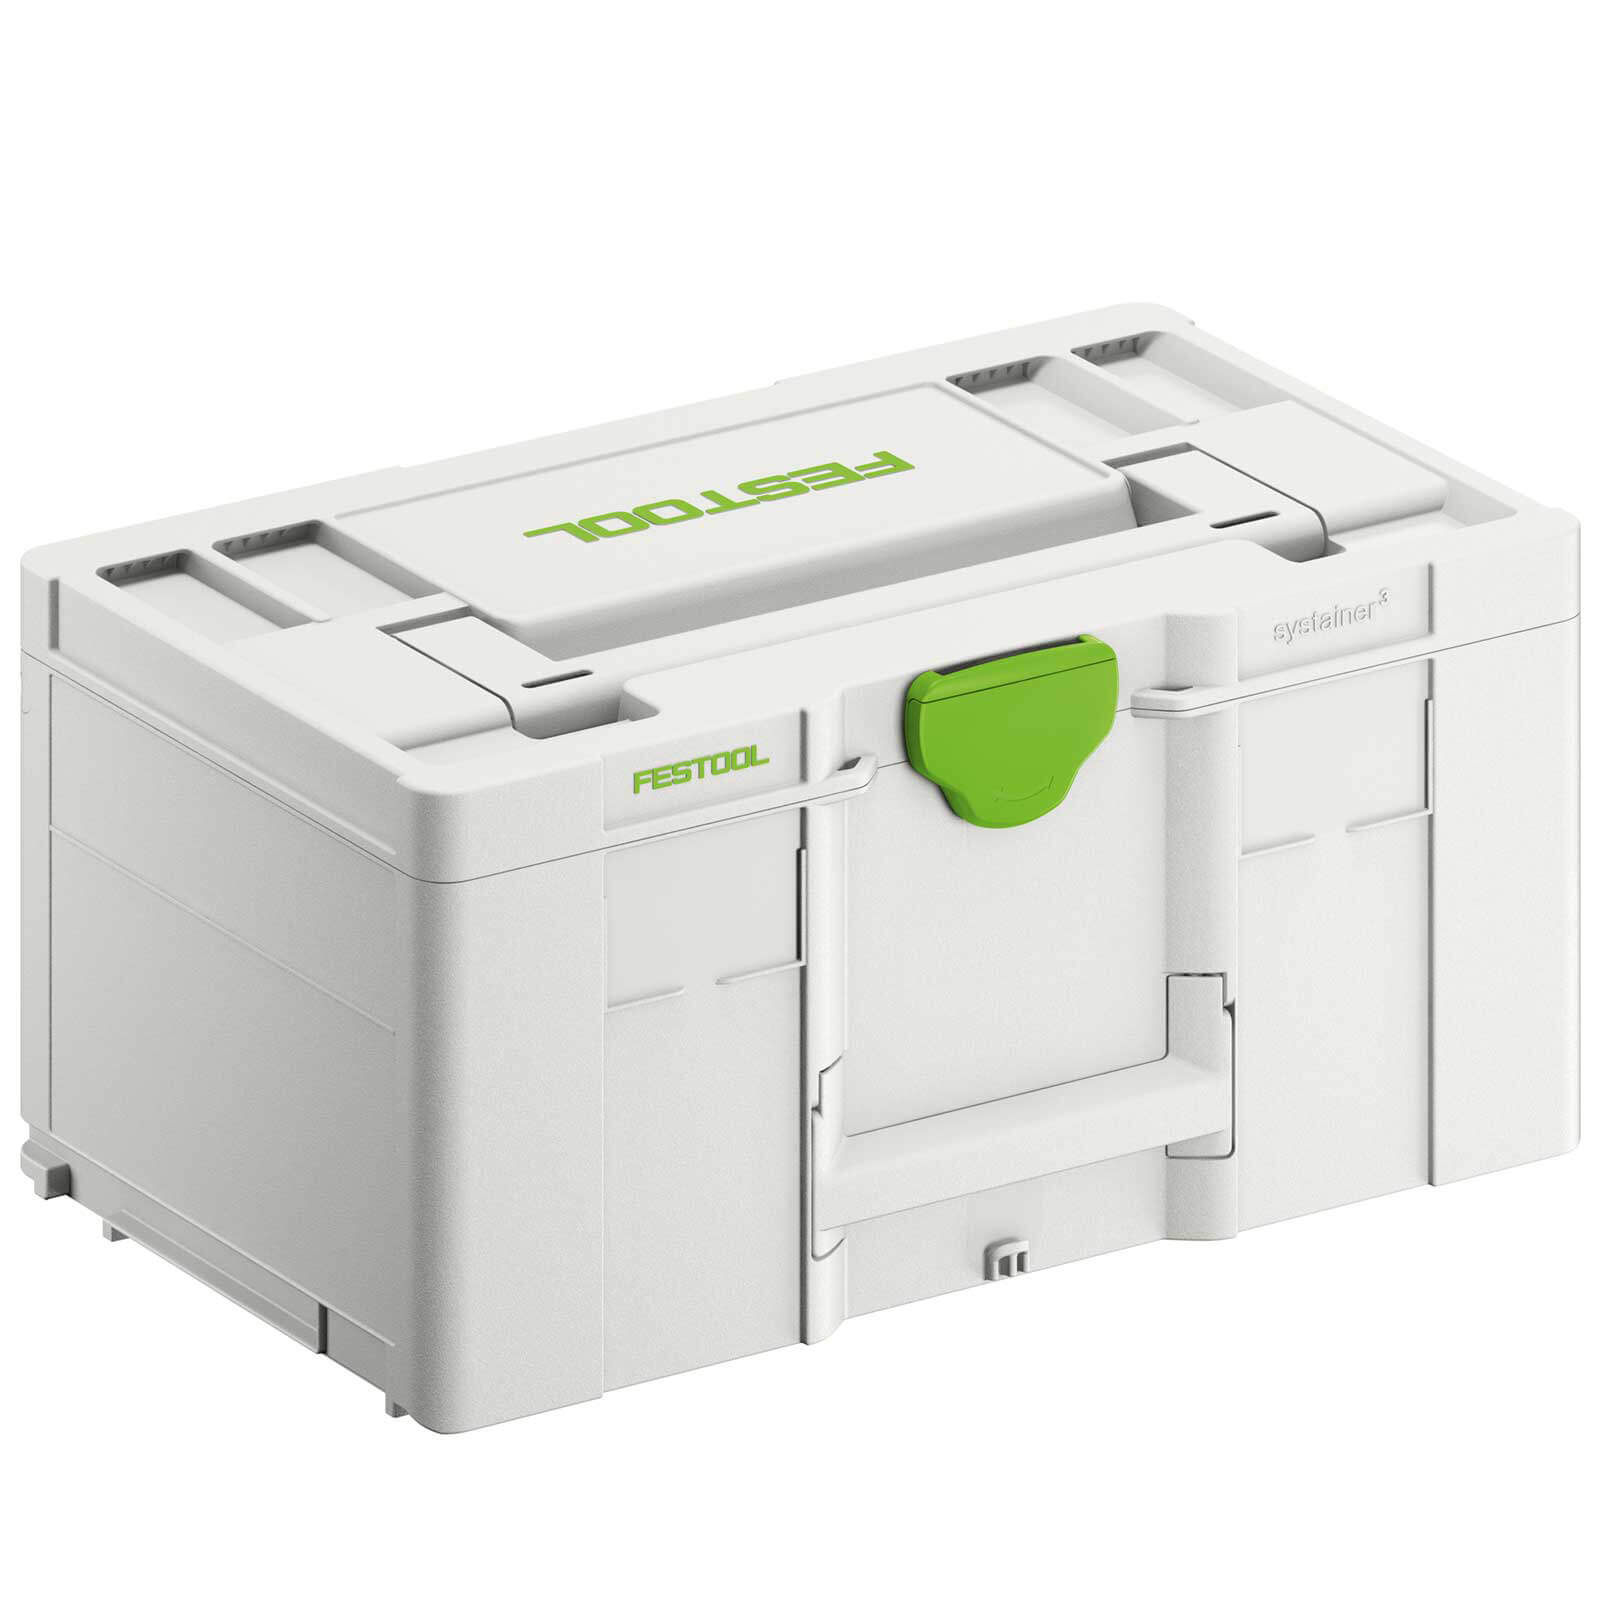 Photo of Festool Systainer Sys3 L 237 Tool Case